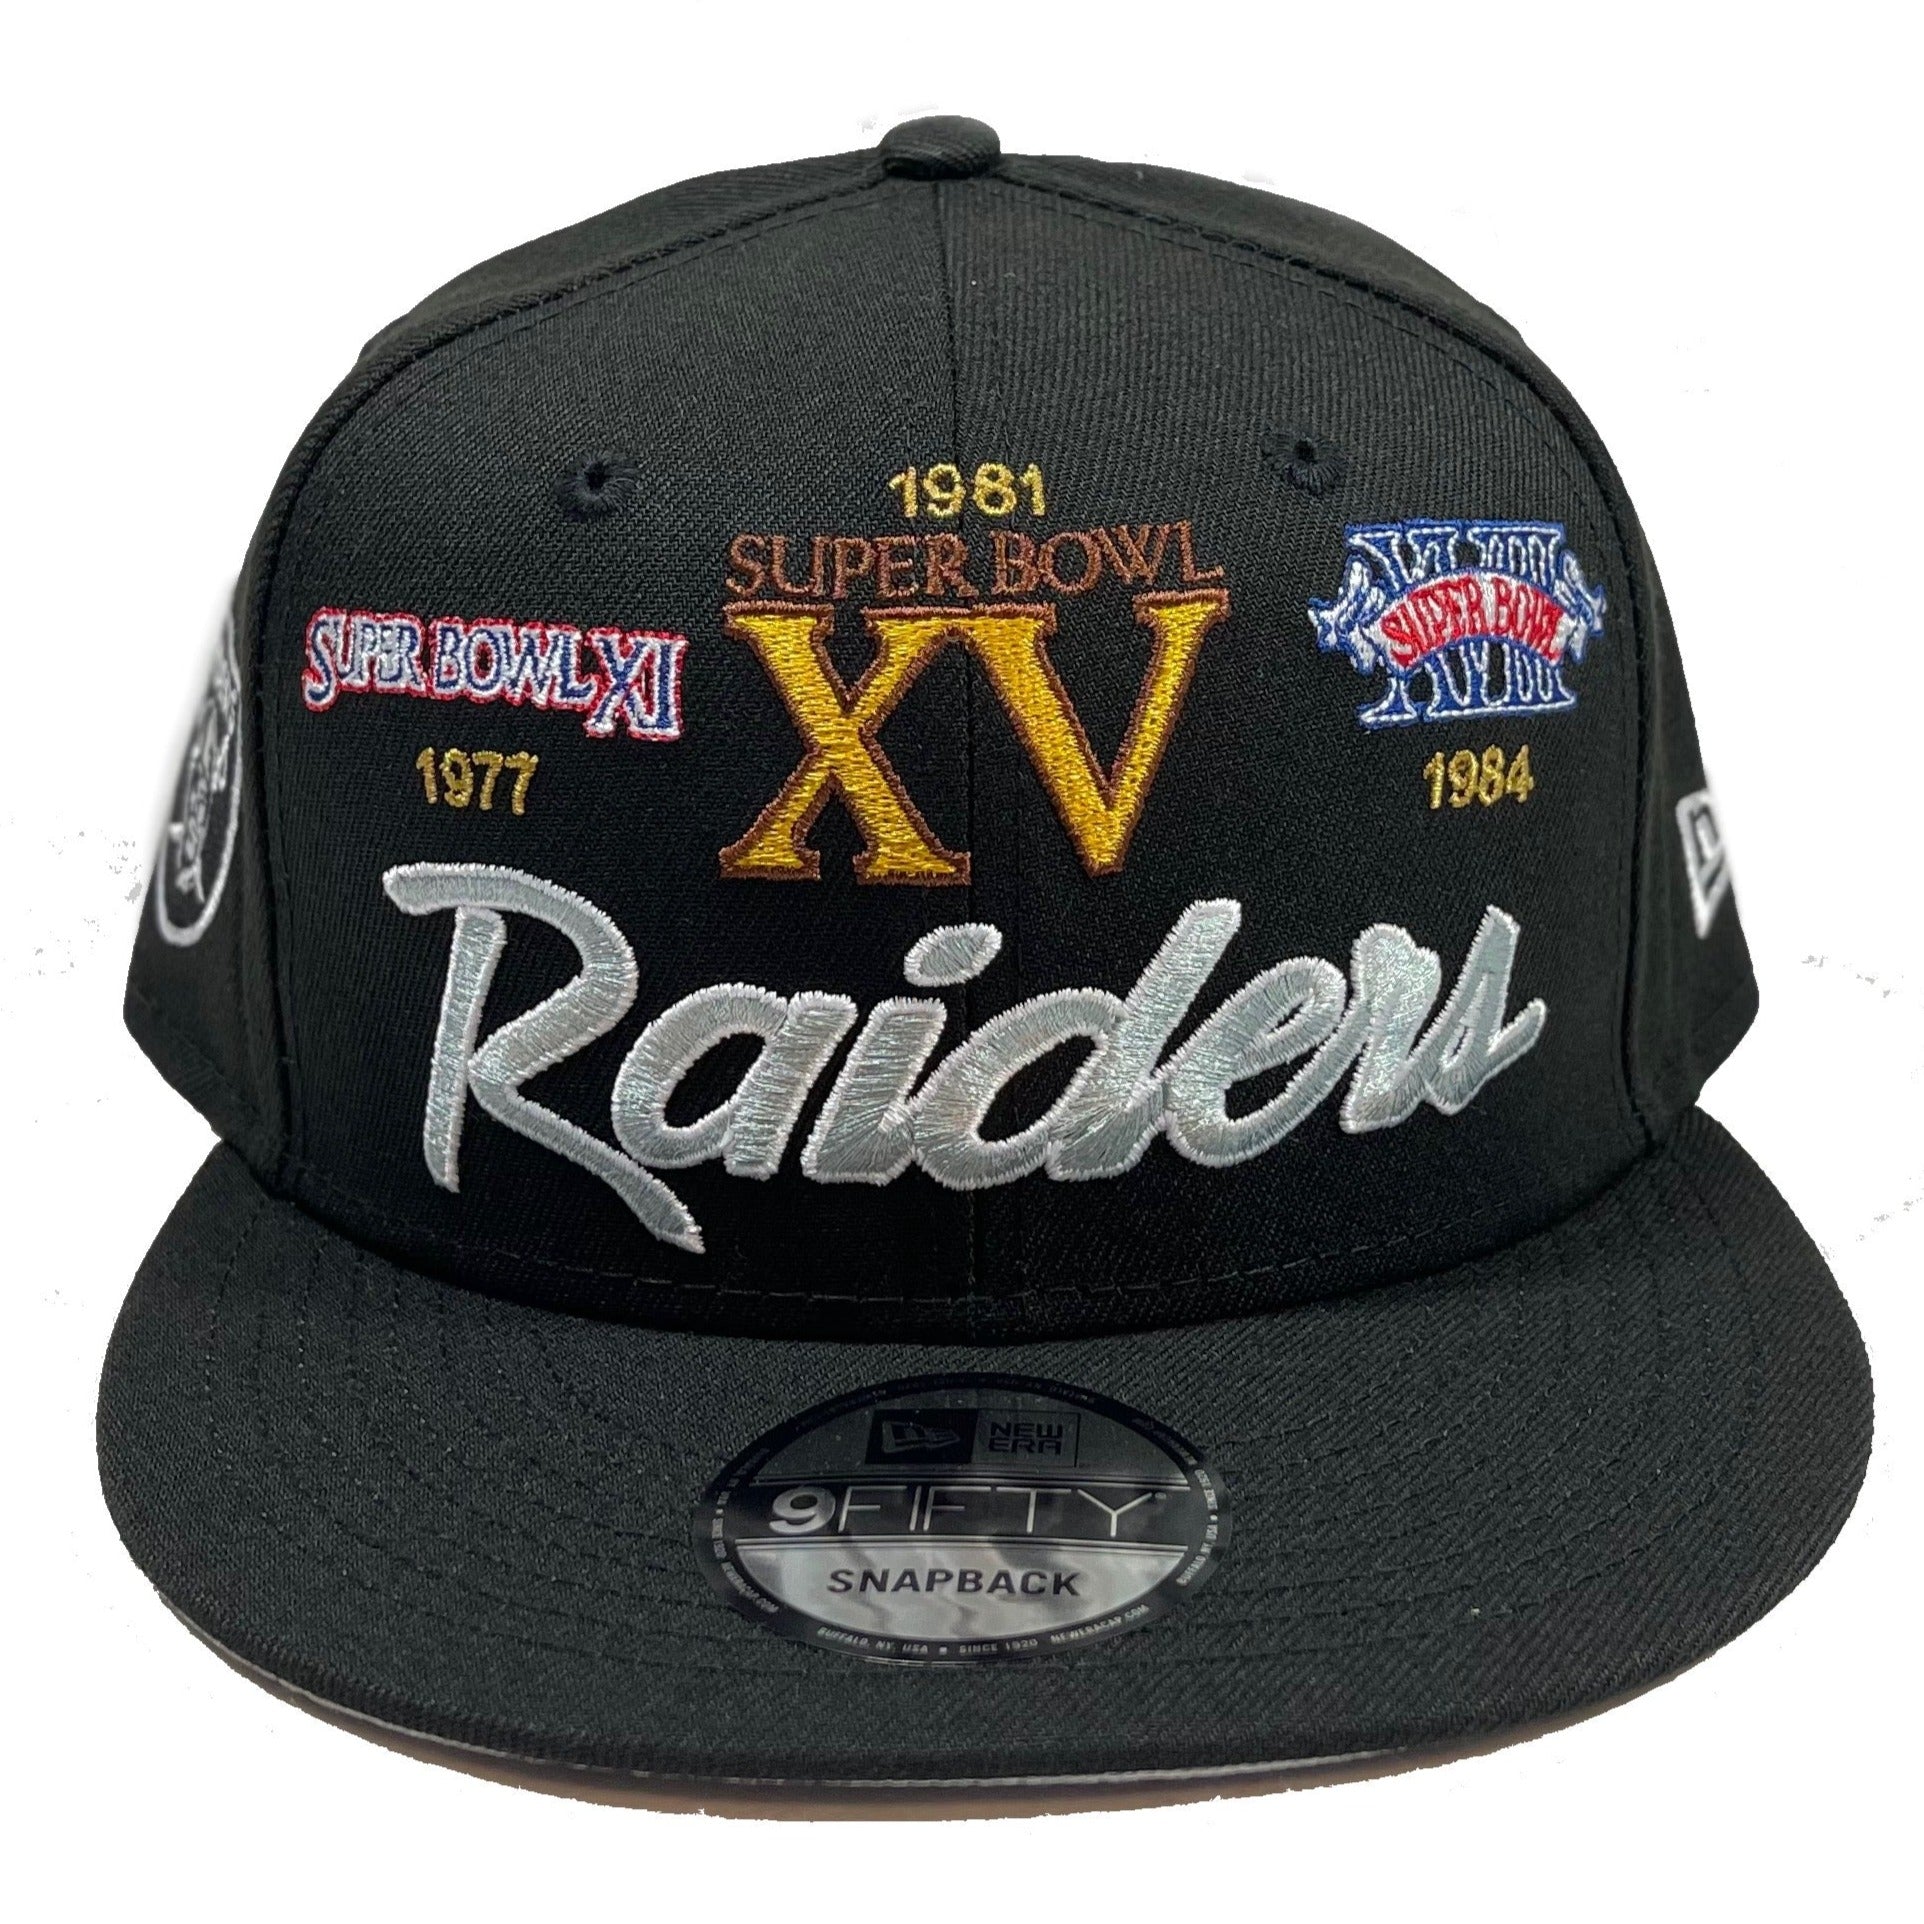 Raiders Superbowl Patches (Black) Snapback – Cap World: Embroidery